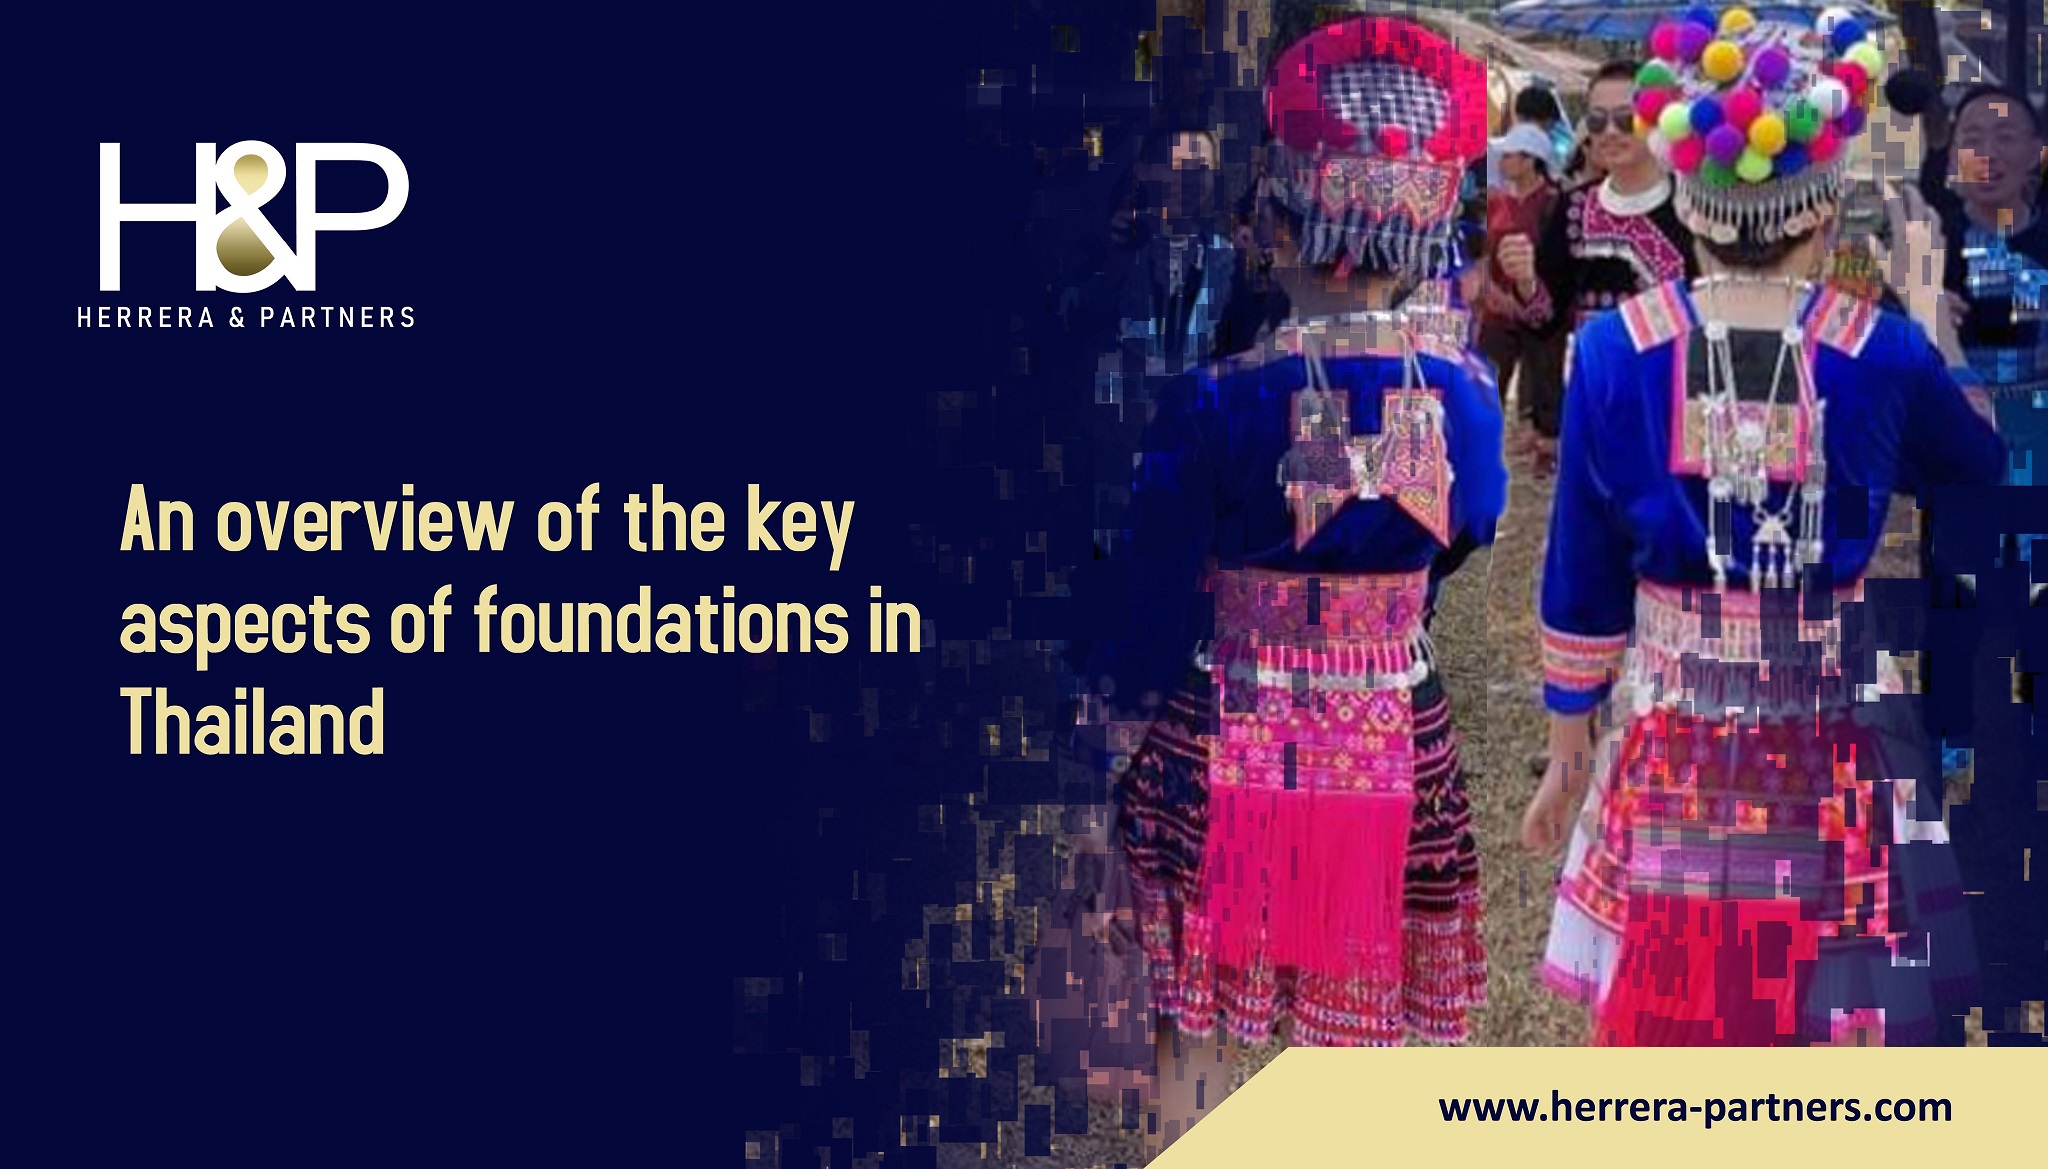 An overview of the key aspects of foundations in Thailand and charity organizations HP Bangkok leading law firm